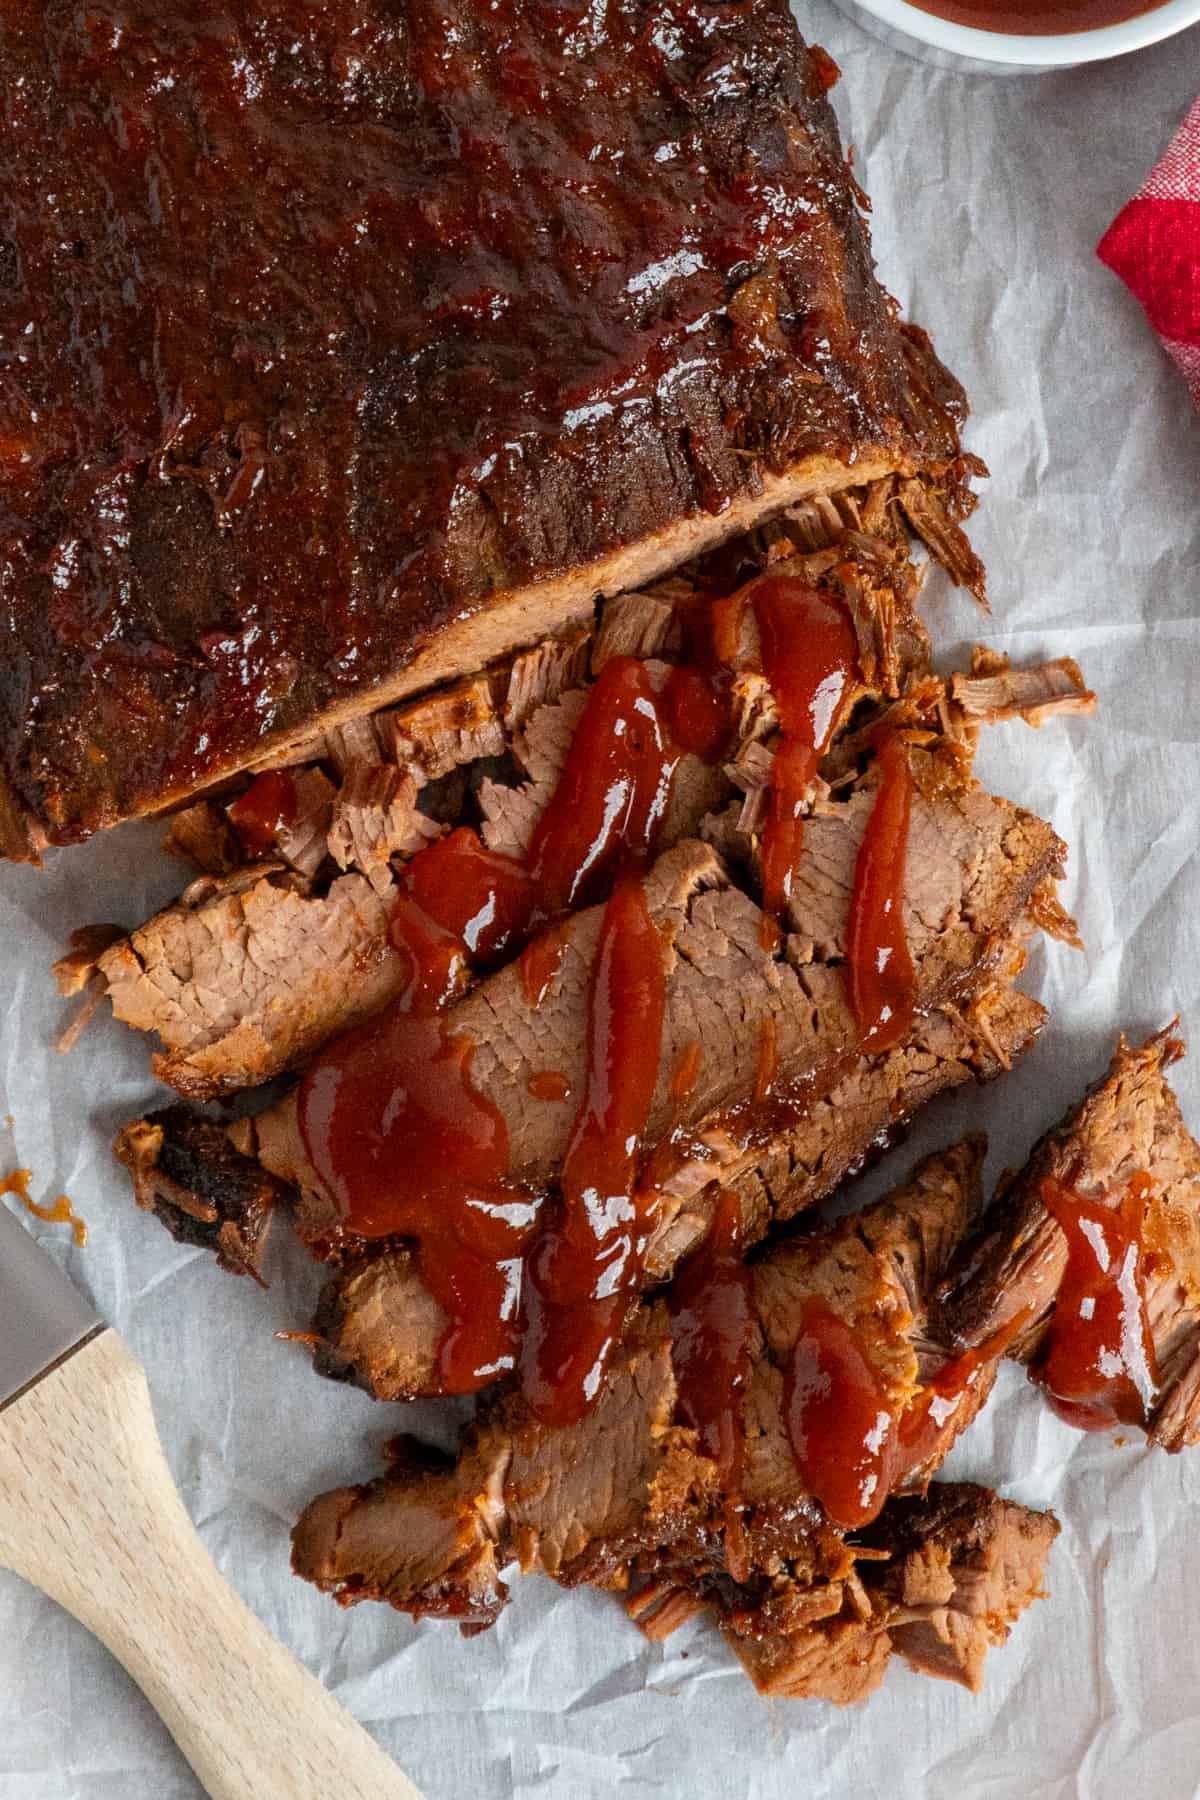 Overhead look at sliced brisket with BBQ sauce on top.